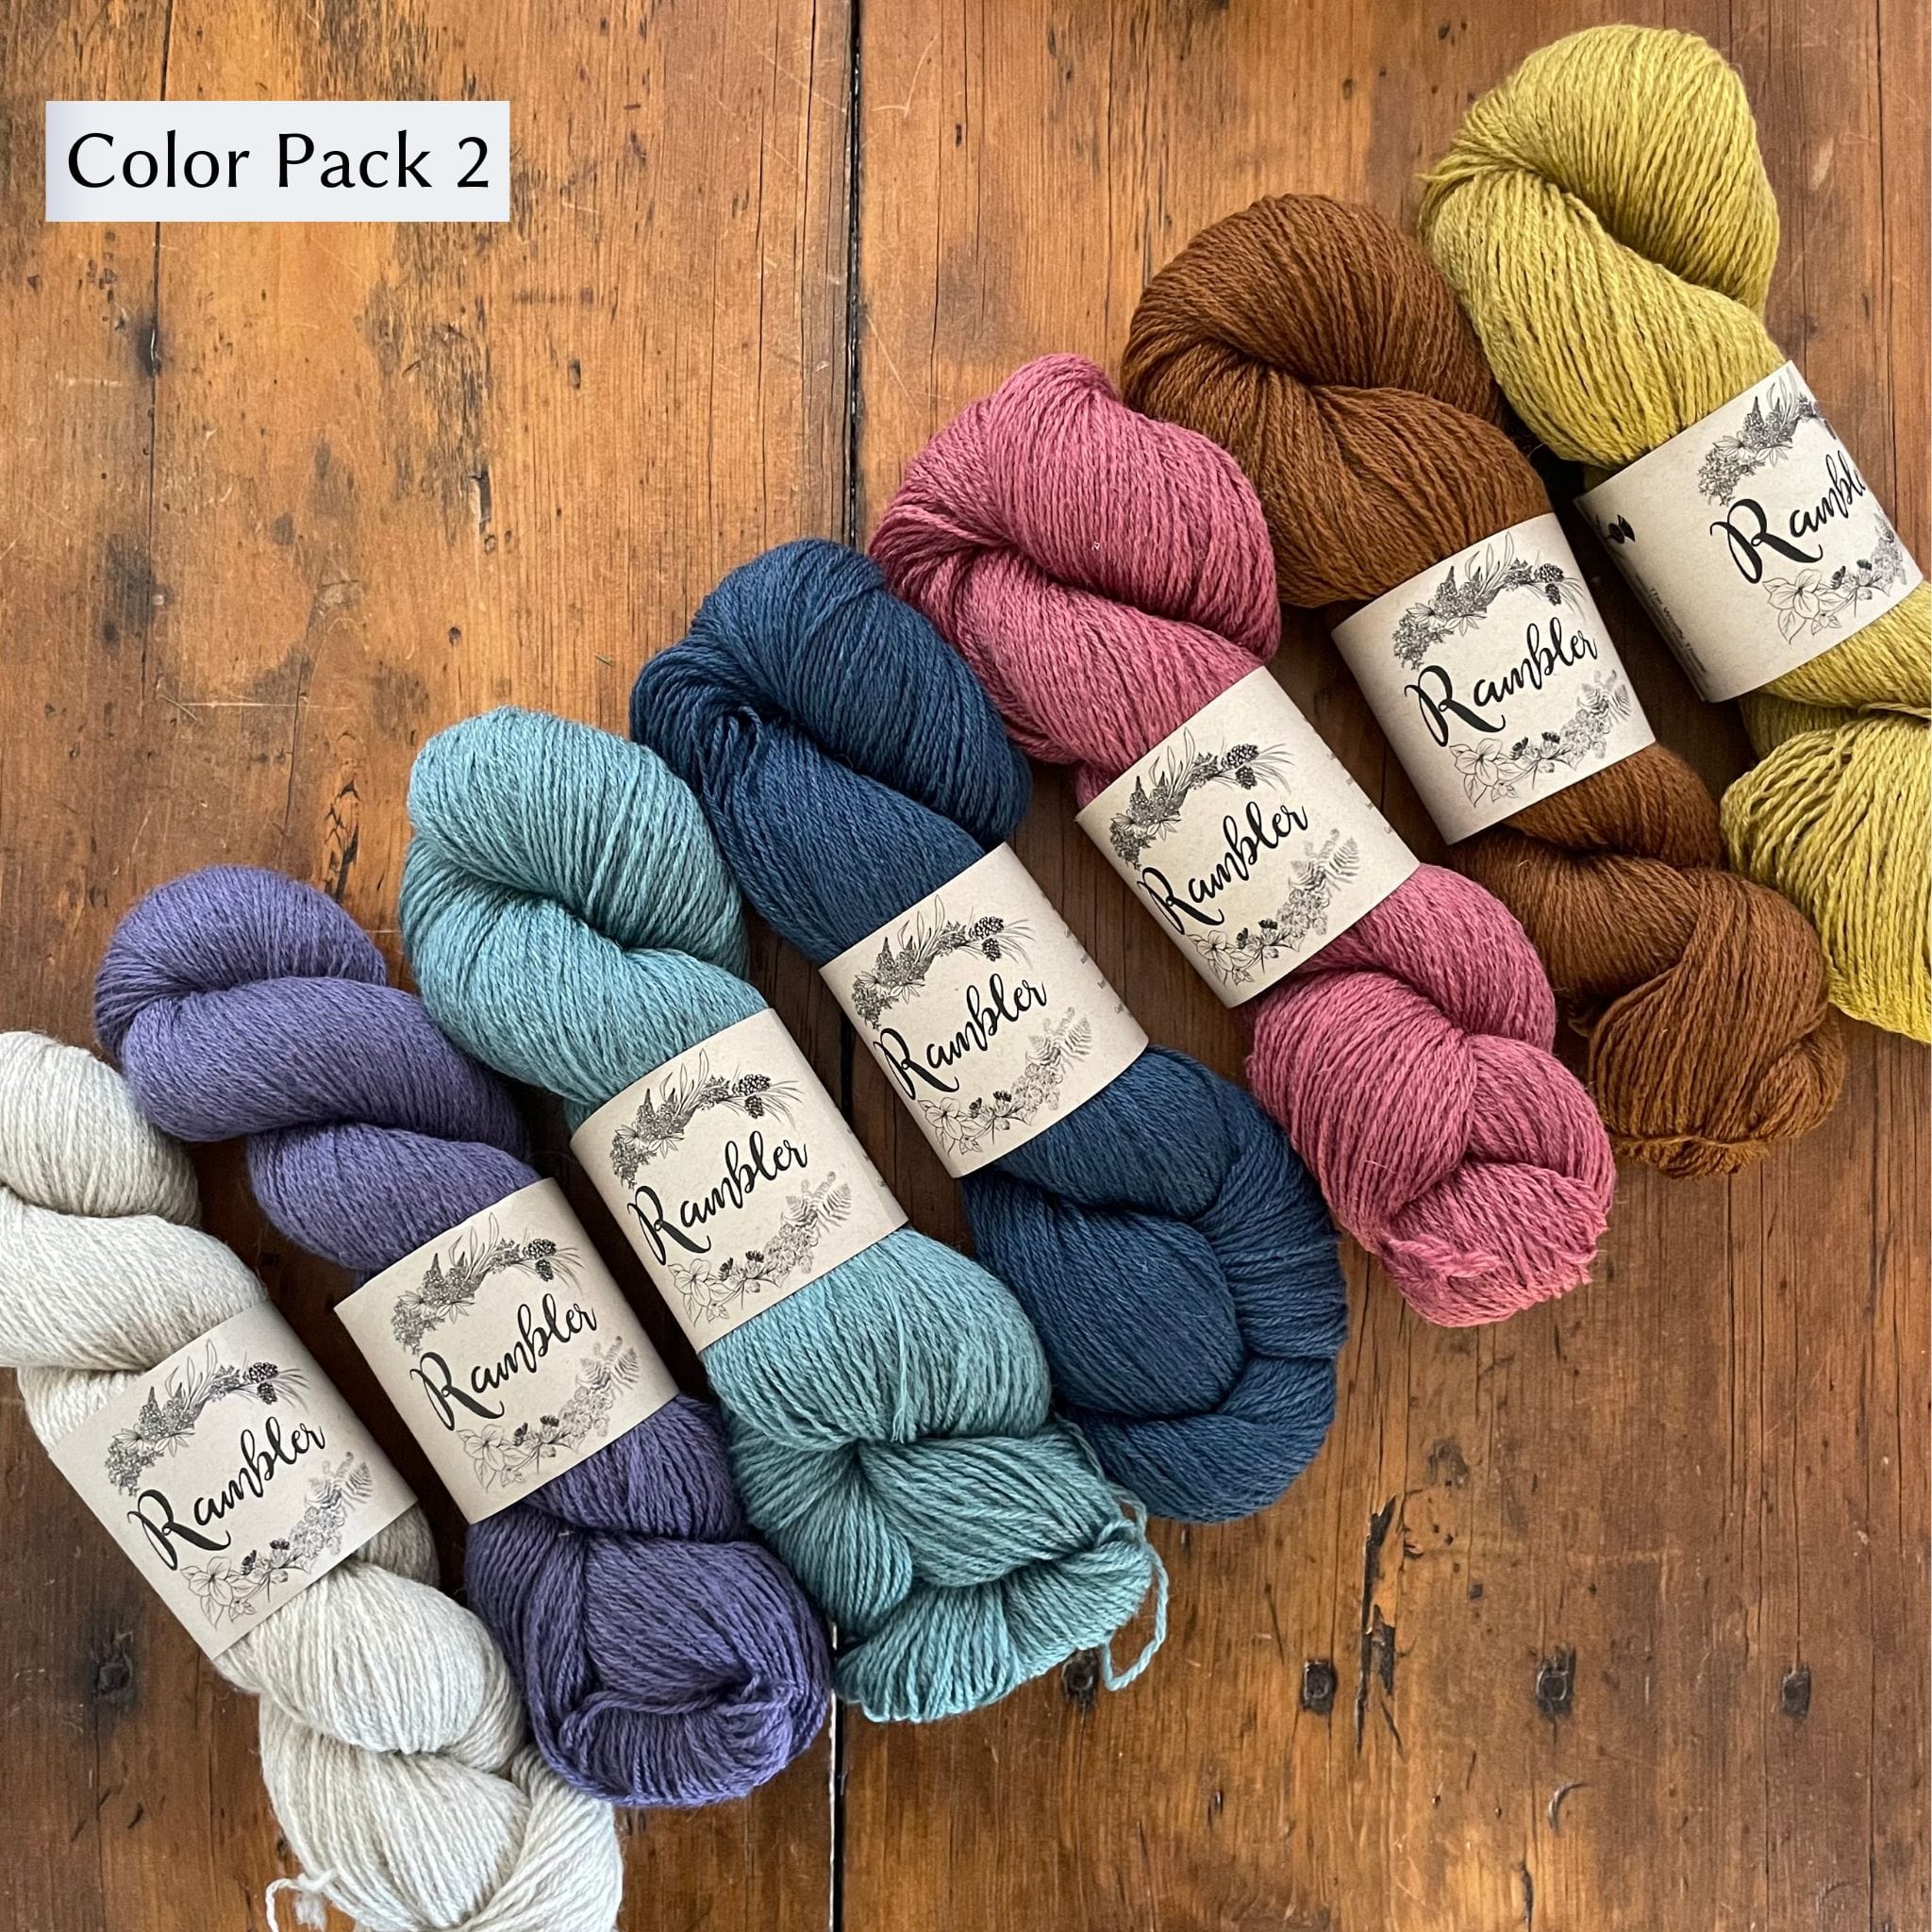 Rambler Yarn by The Woolly Thistle